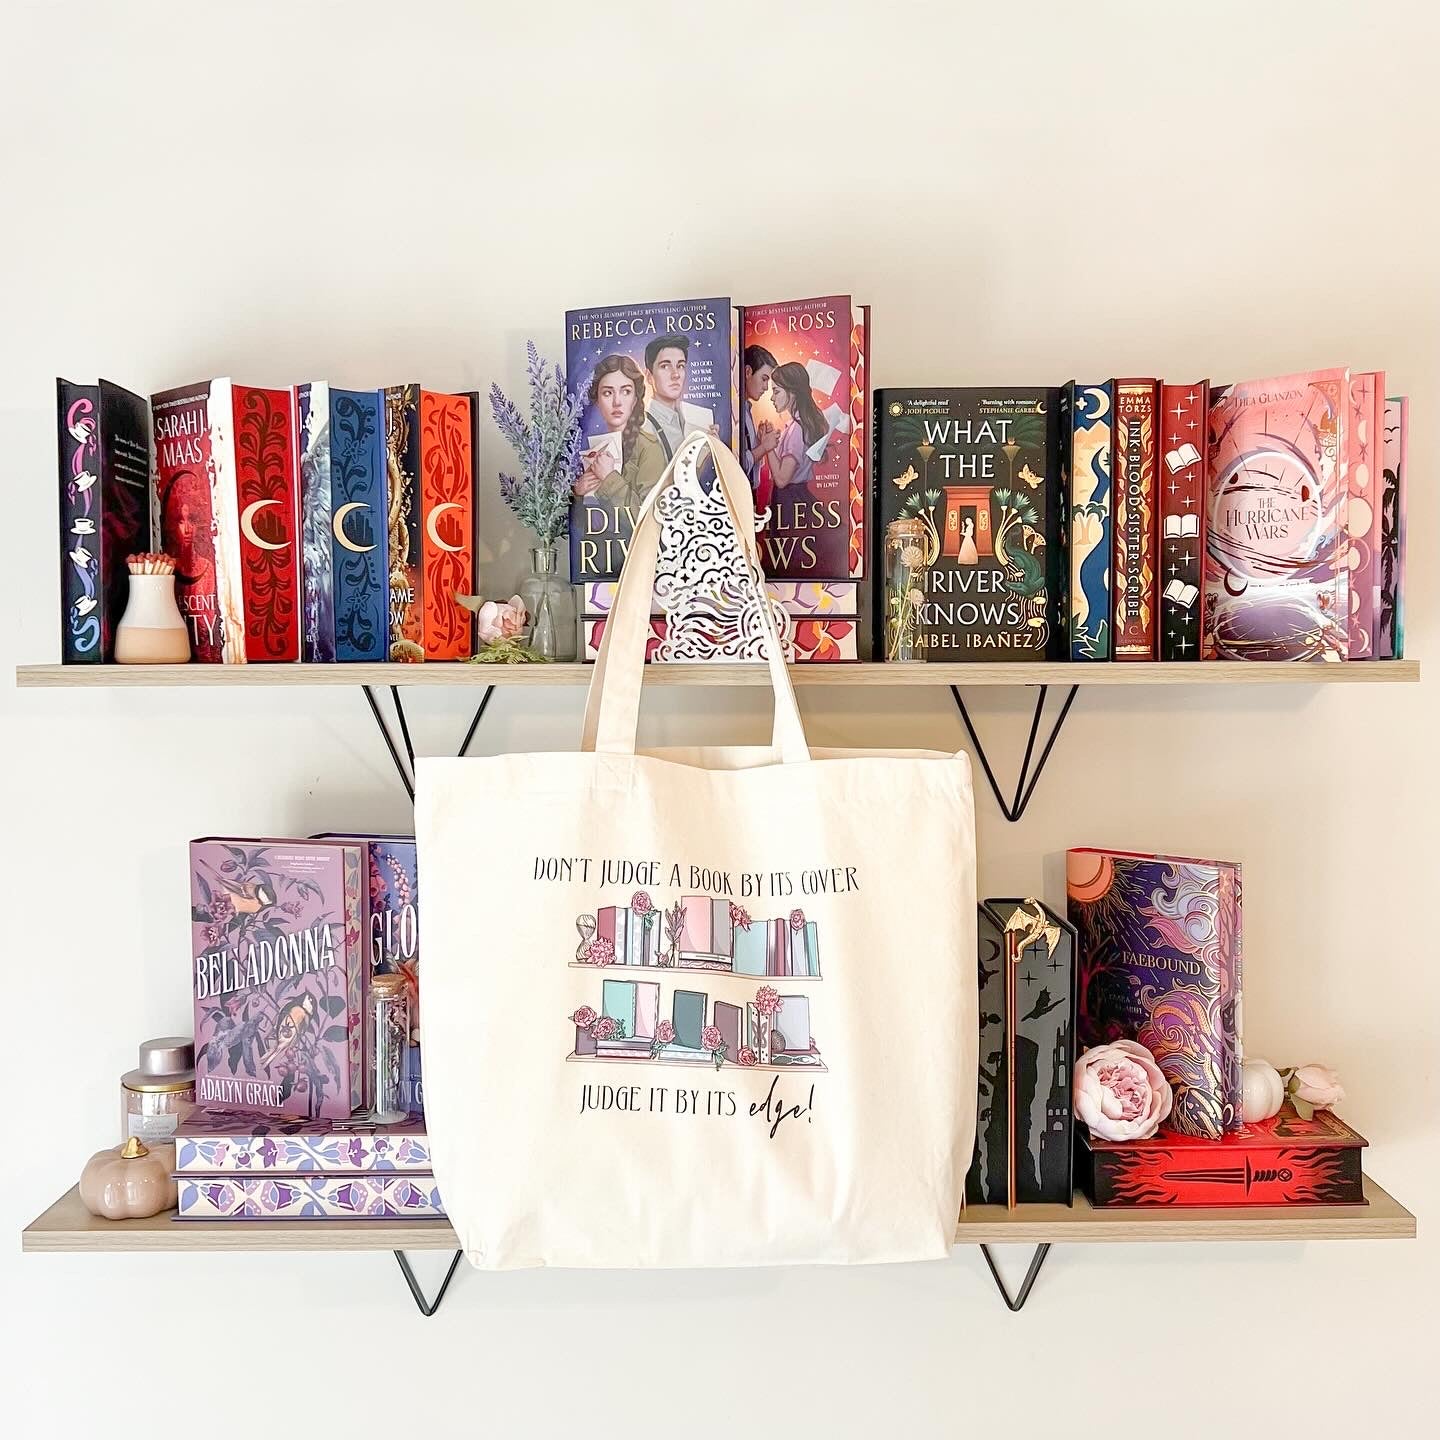 ‘Judge a book by its edge’ large 100% cotton tote bag